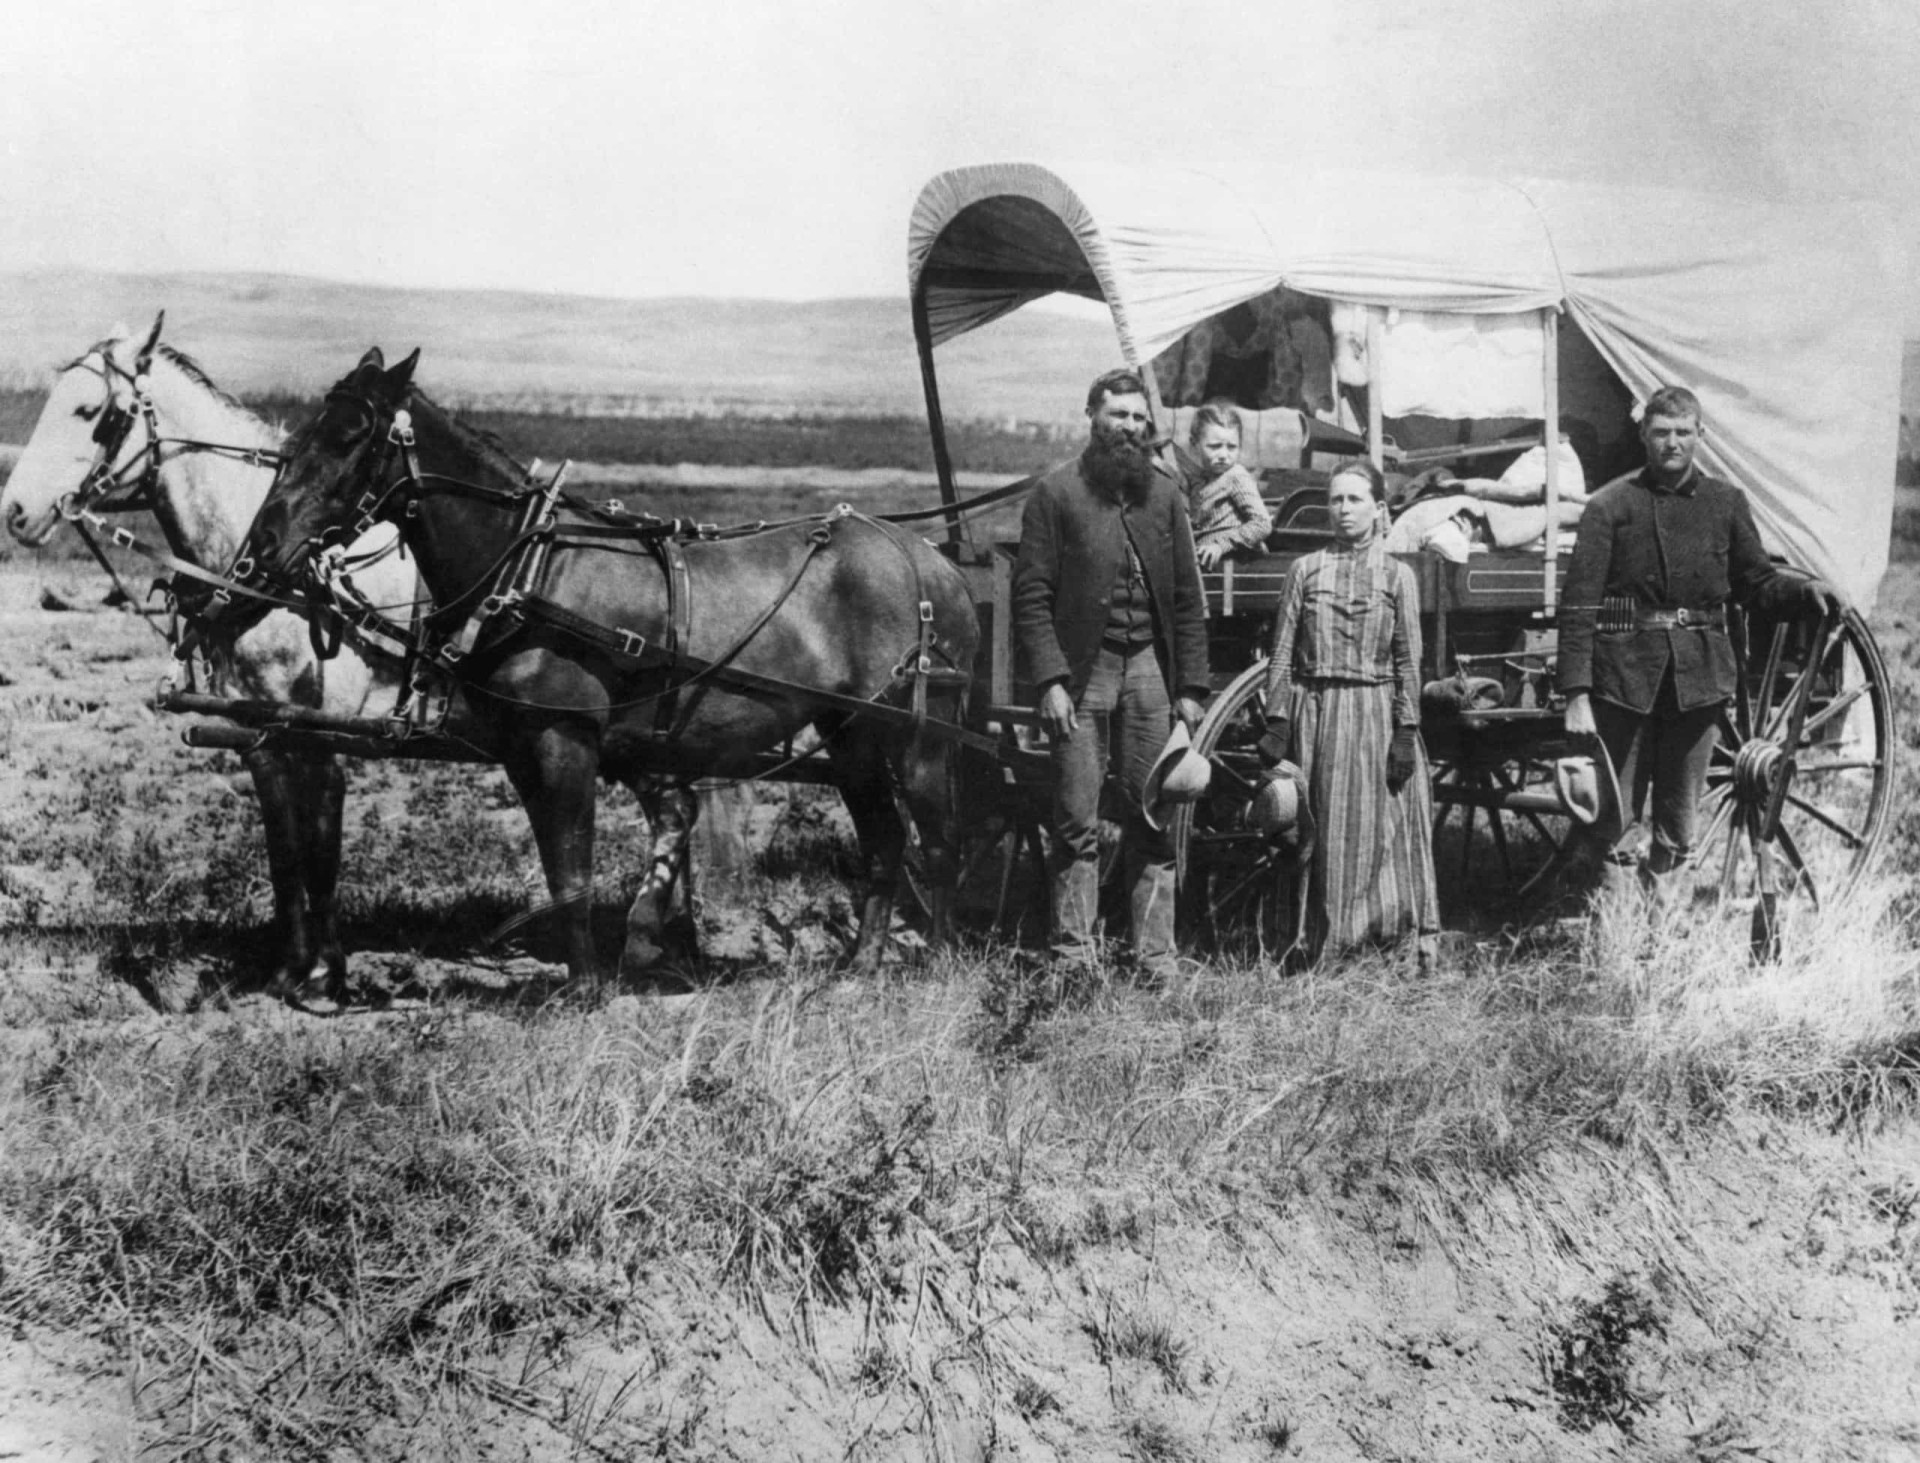 <p>In the United States, the covered wagon became a symbol of the great 19th-century American migration. Sometimes called a prairie wagon, these carriages were made out of wood and canvas and carried pioneers west along the Mormon Trail and the Santa Fe and Oregon Trails. Pictured in Nebraska in 1886 is a family posing with the covered wagon in which they lived and traveled daily.</p><p><a href="https://www.msn.com/en-us/community/channel/vid-7xx8mnucu55yw63we9va2gwr7uihbxwc68fxqp25x6tg4ftibpra?cvid=94631541bc0f4f89bfd59158d696ad7e">Follow us and access great exclusive content every day</a></p>